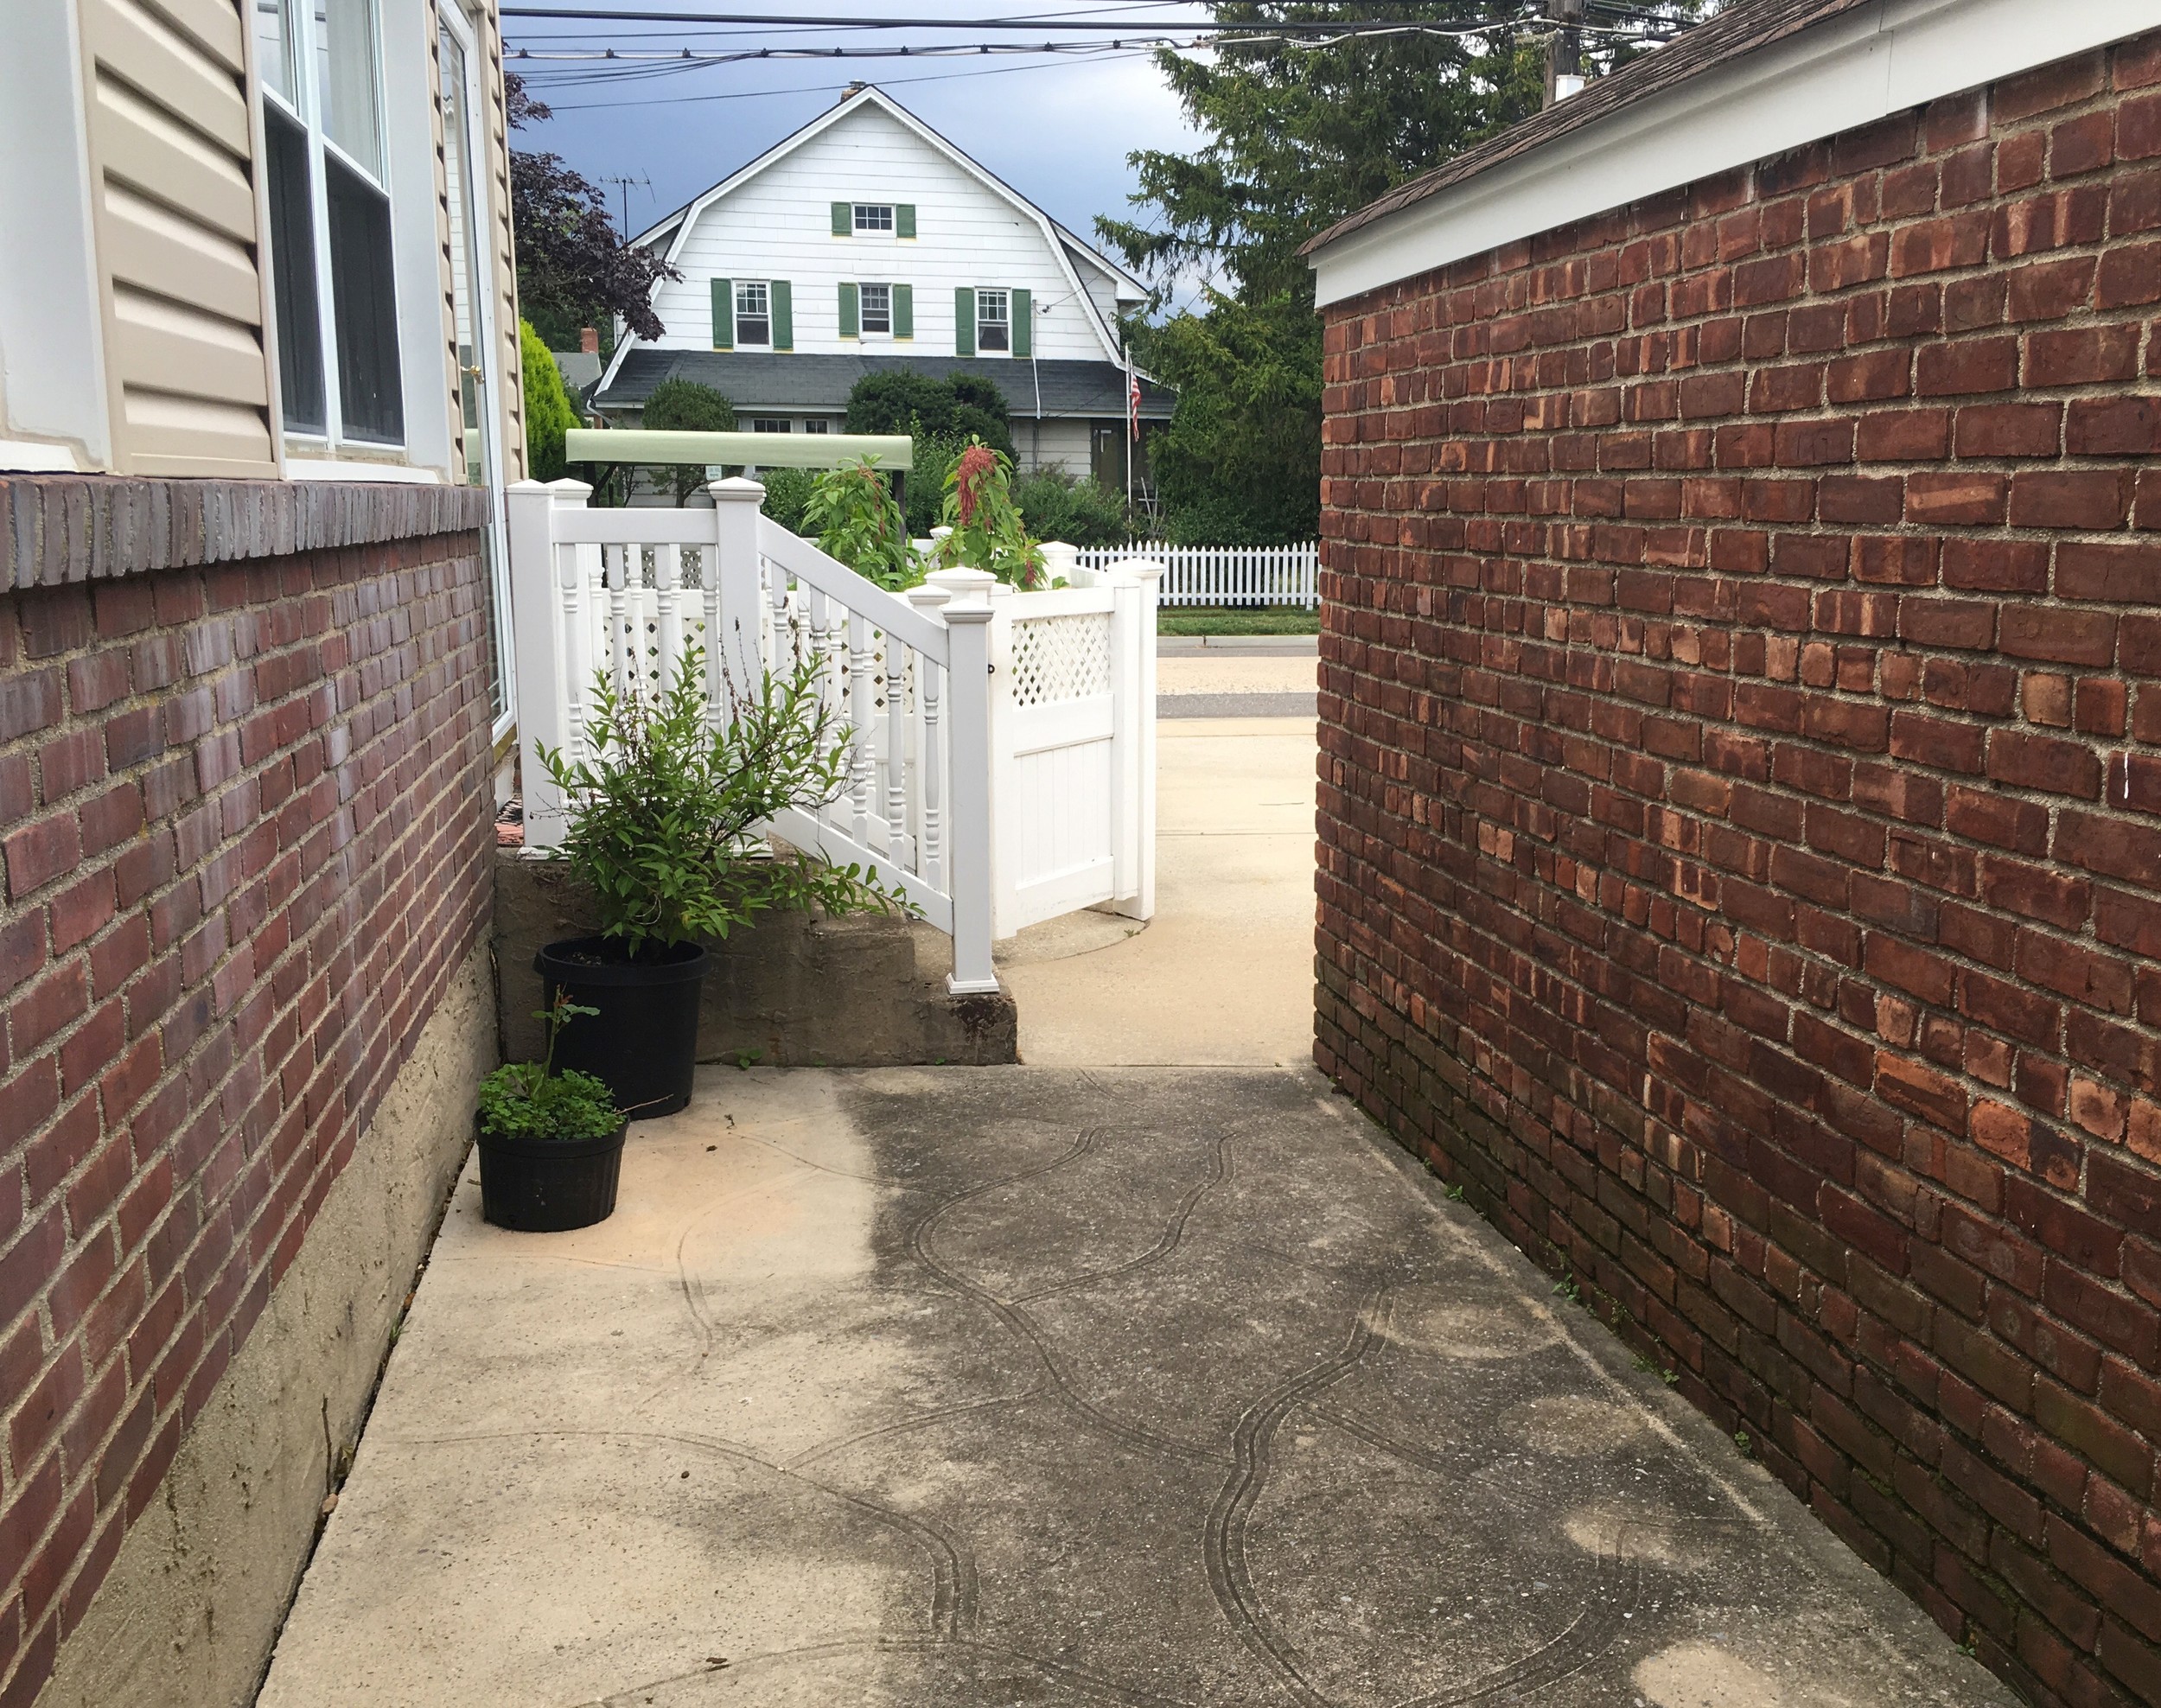 The area of Seby Oliveri's backyard, where Justin Hay hid from police after stealing a shotgun and bulletproof vest from a parked vehicle in Lynbrook.